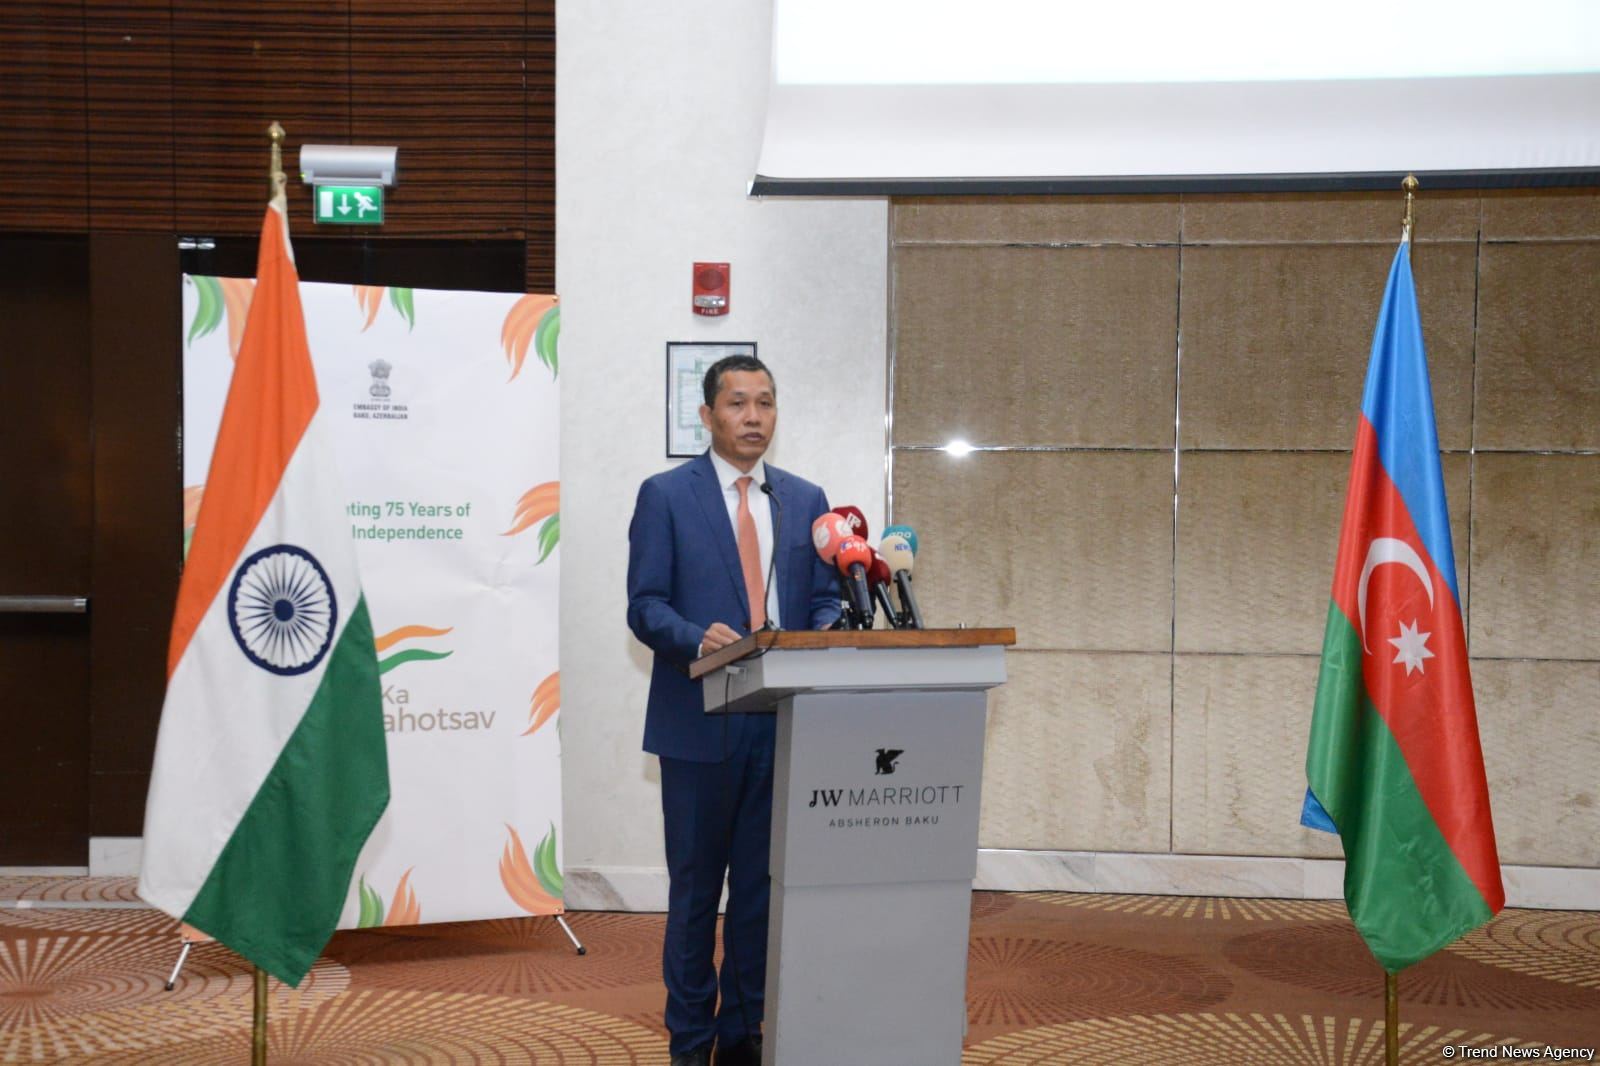 Embassy of India in Baku celebrates National Tourism Day as part of 73rd Republic Day of India and 75 years of India’s Independence (PHOTO)